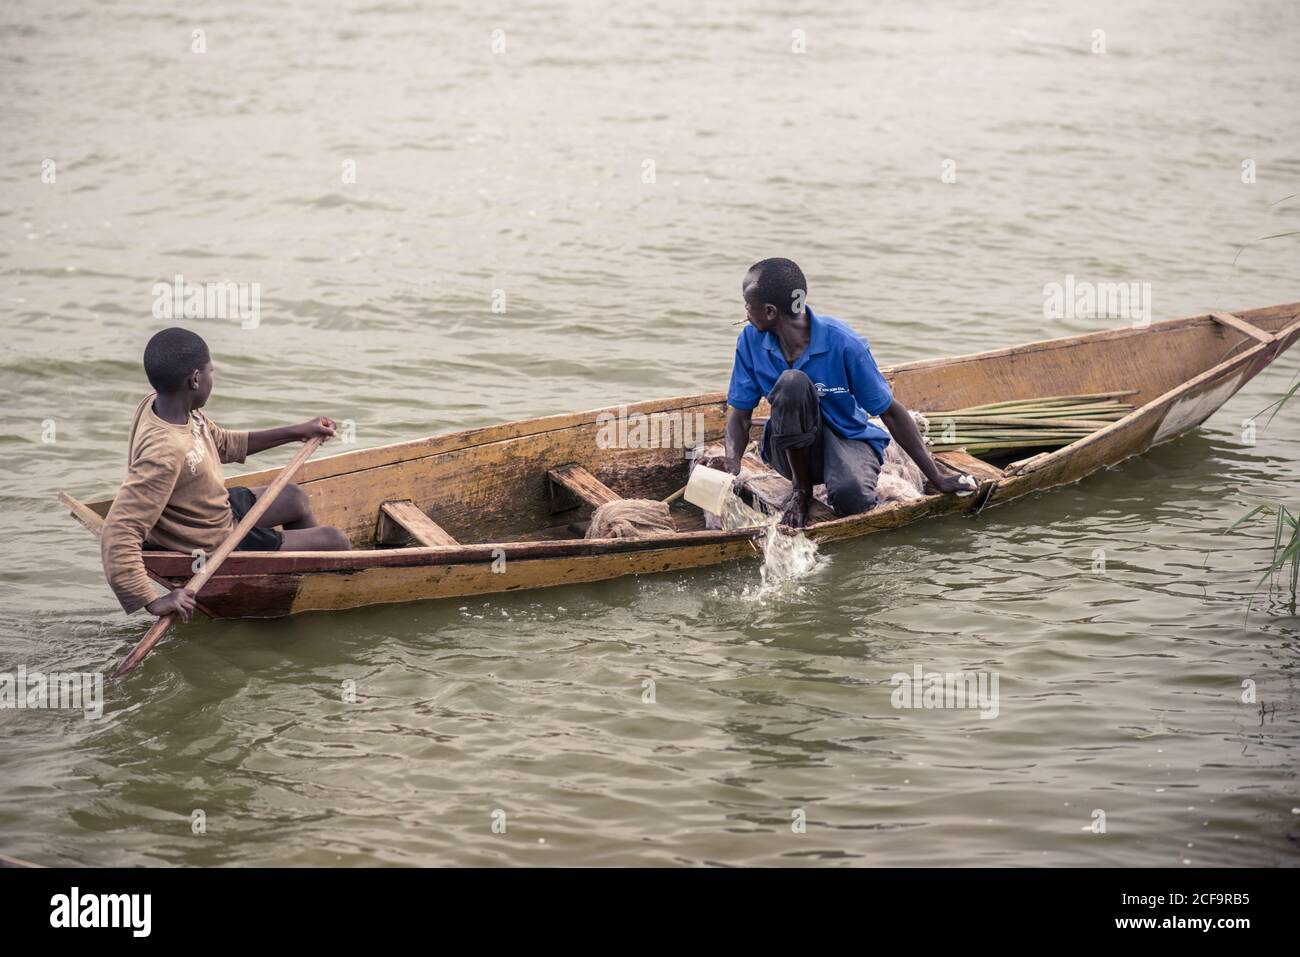 Uganda - November, 26 2016: Male teenager rowing while adult man bailing out water from old boat and looking away during ride on dirty river Stock Photo